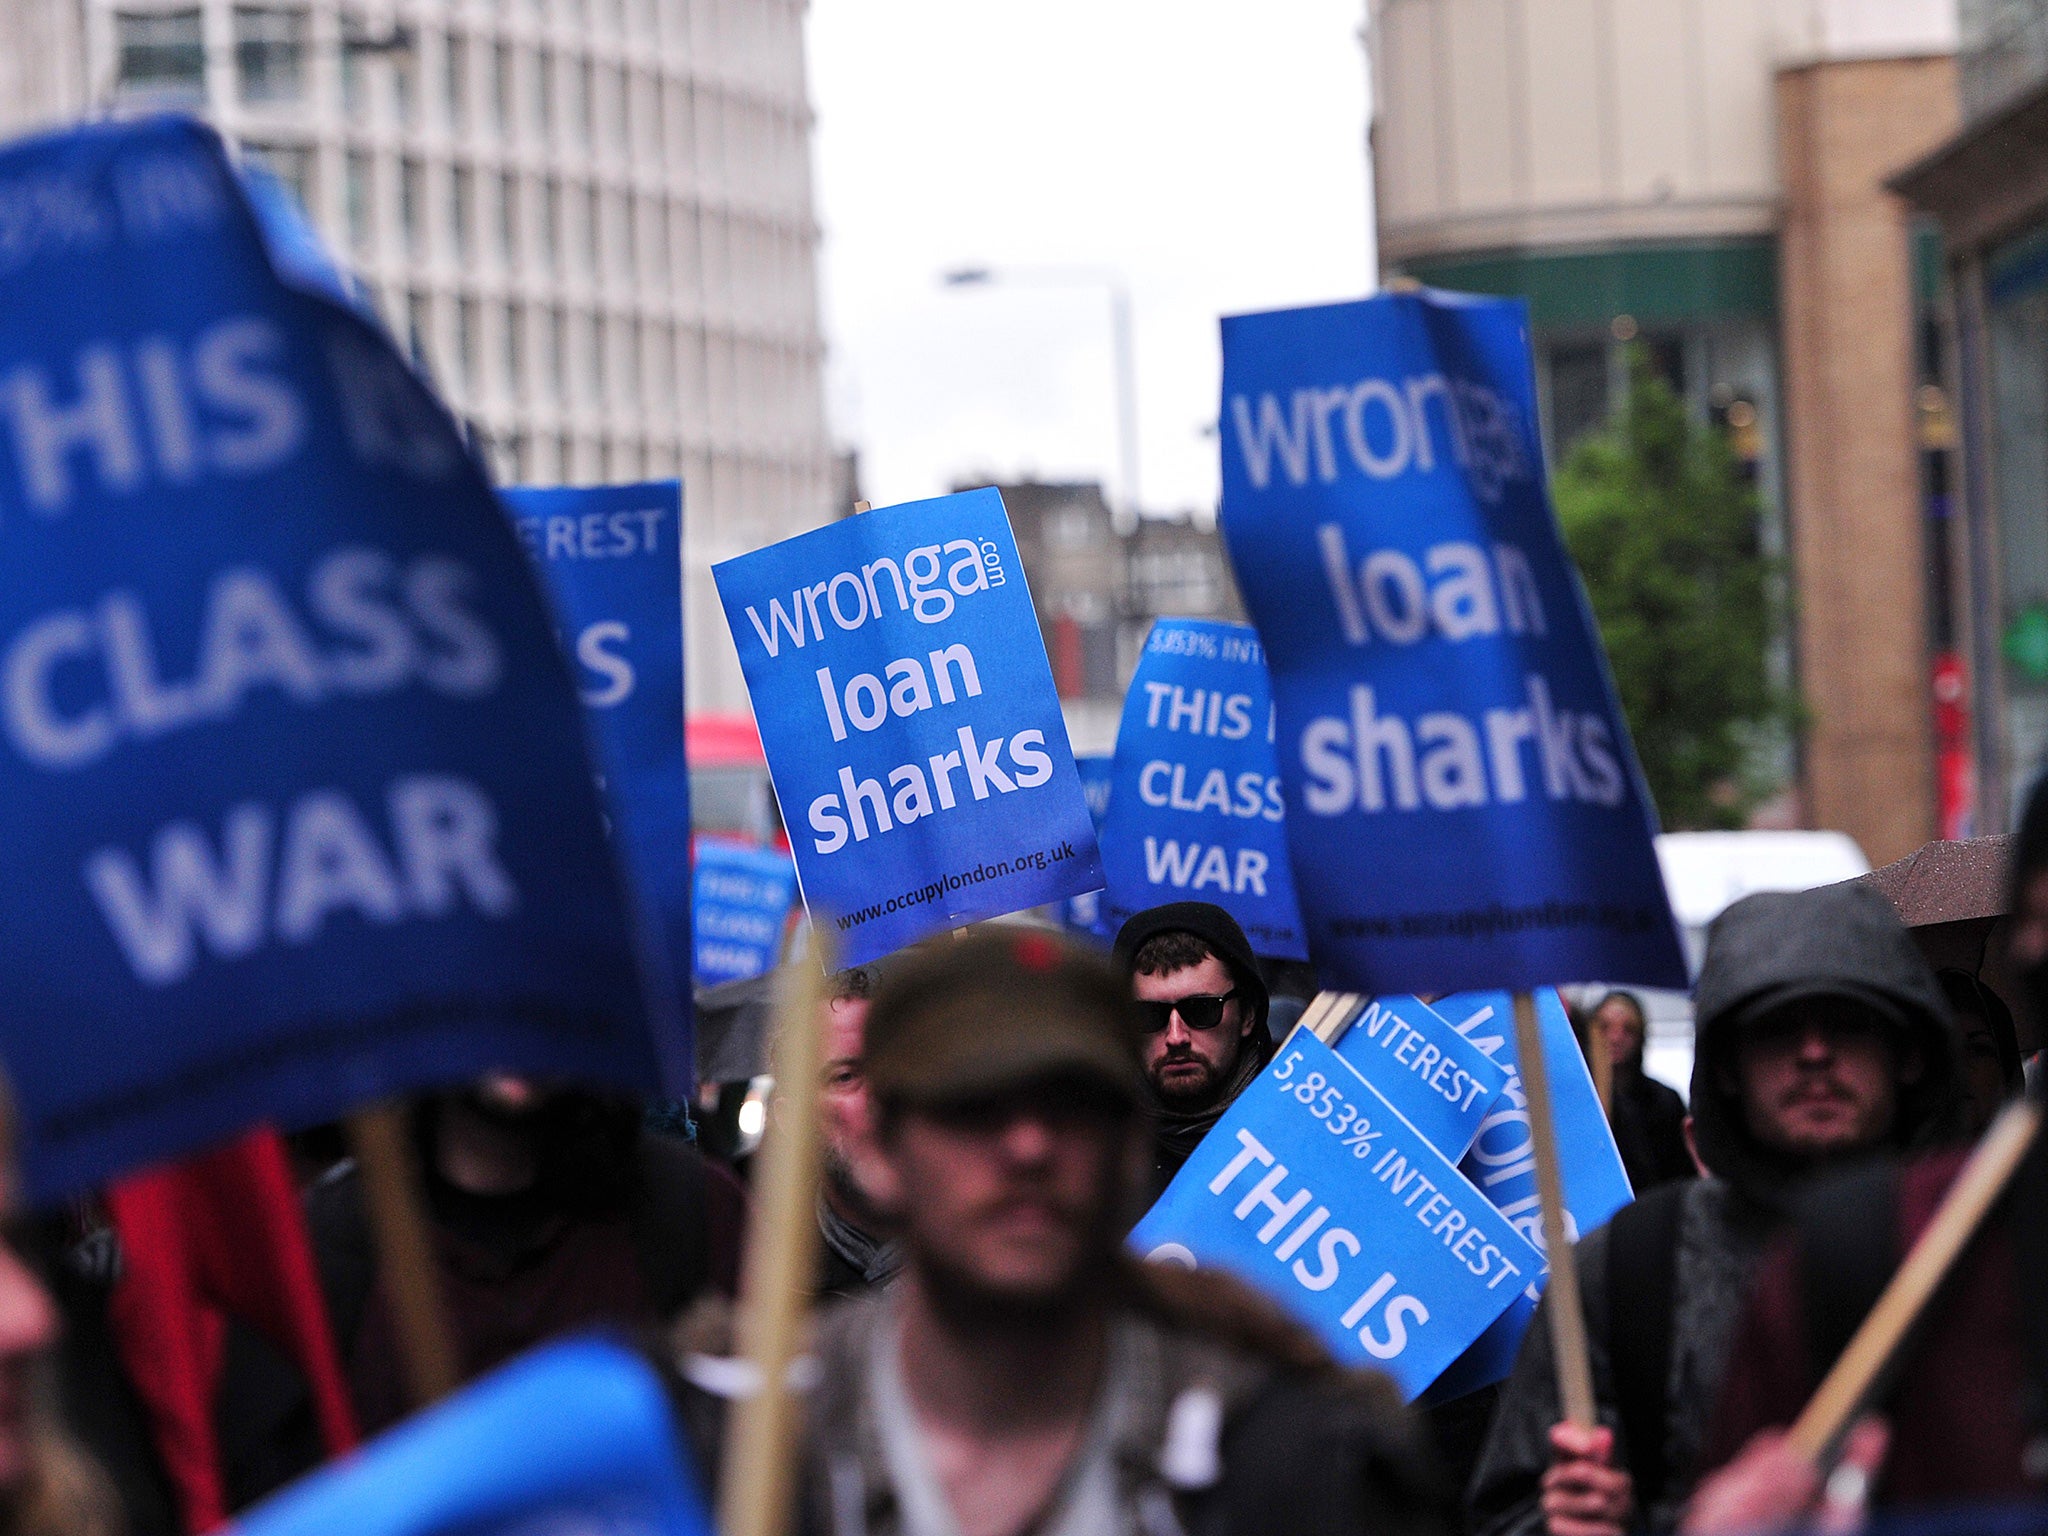 Wonga became synonymous with stories of vulnerable people being forced into unaffordable debt